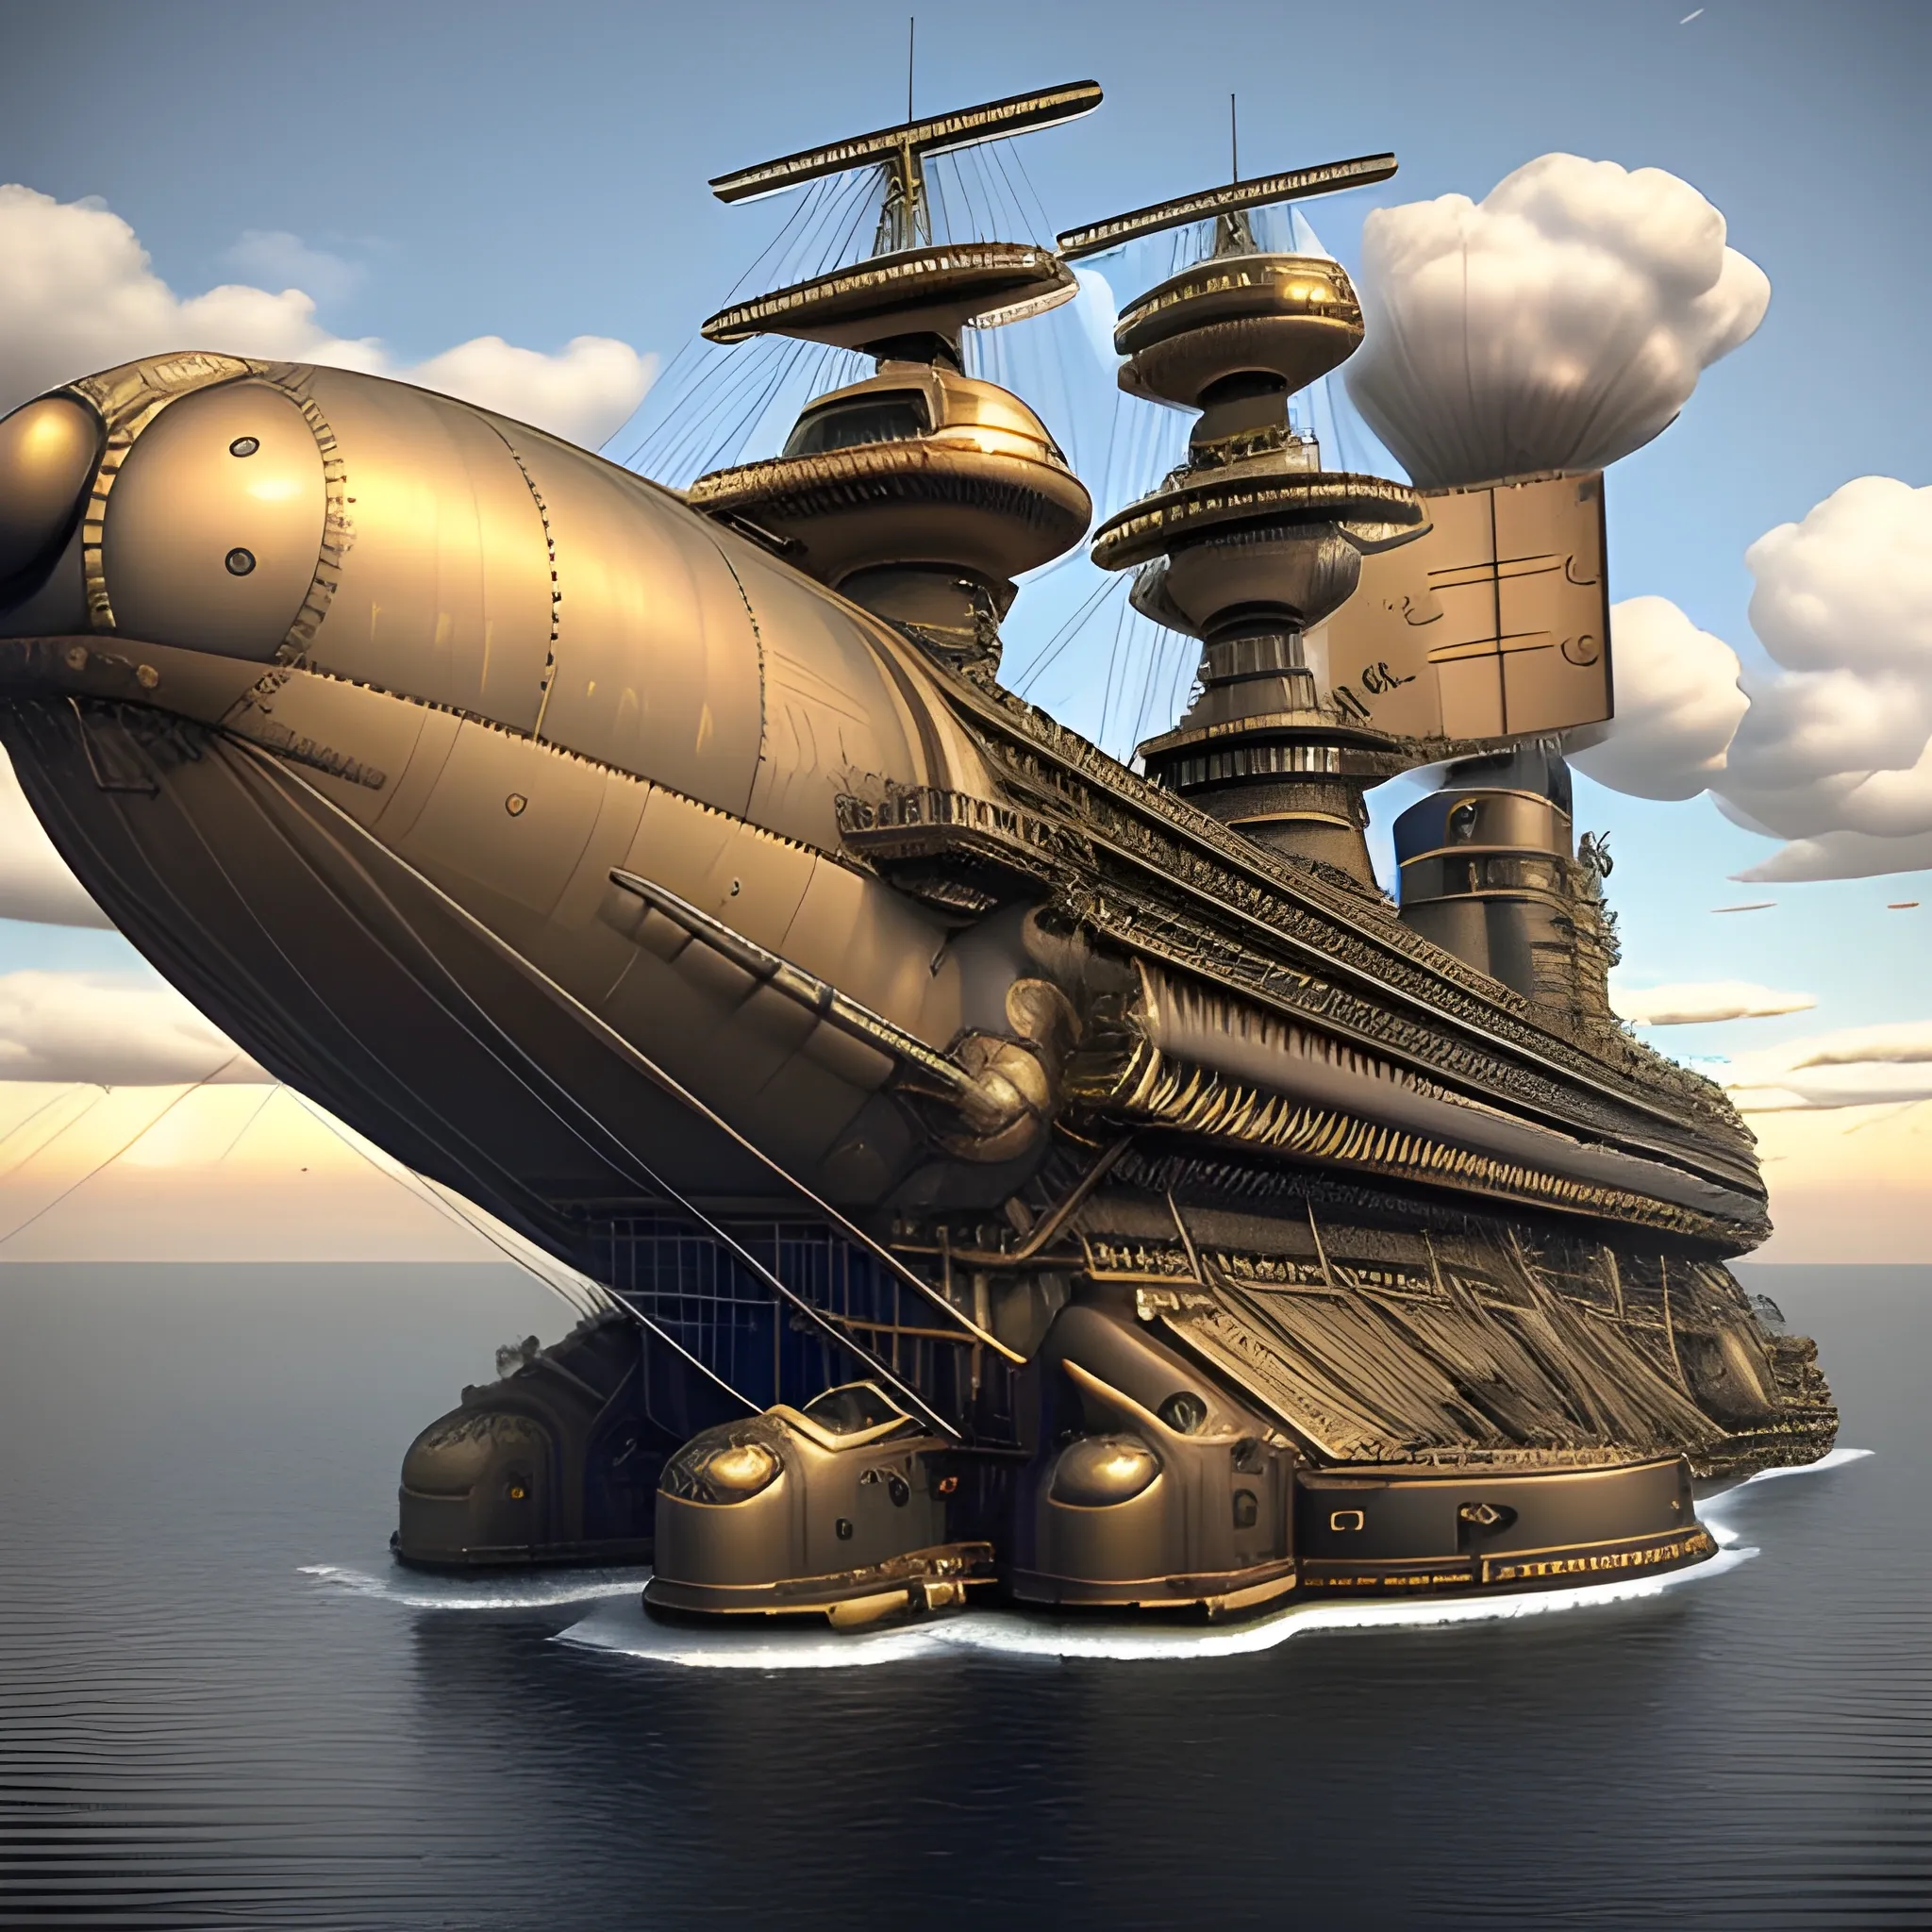 massive steampunk airship, blimp, dreadnaught, steampunk, pill-shaped, biplane fleets, turreted cannons on deck, cannons on hull, propeller engines, large cannons, deck guns, hull guns, weird guns, multiple guns, in air, flying, in clouds, 3D